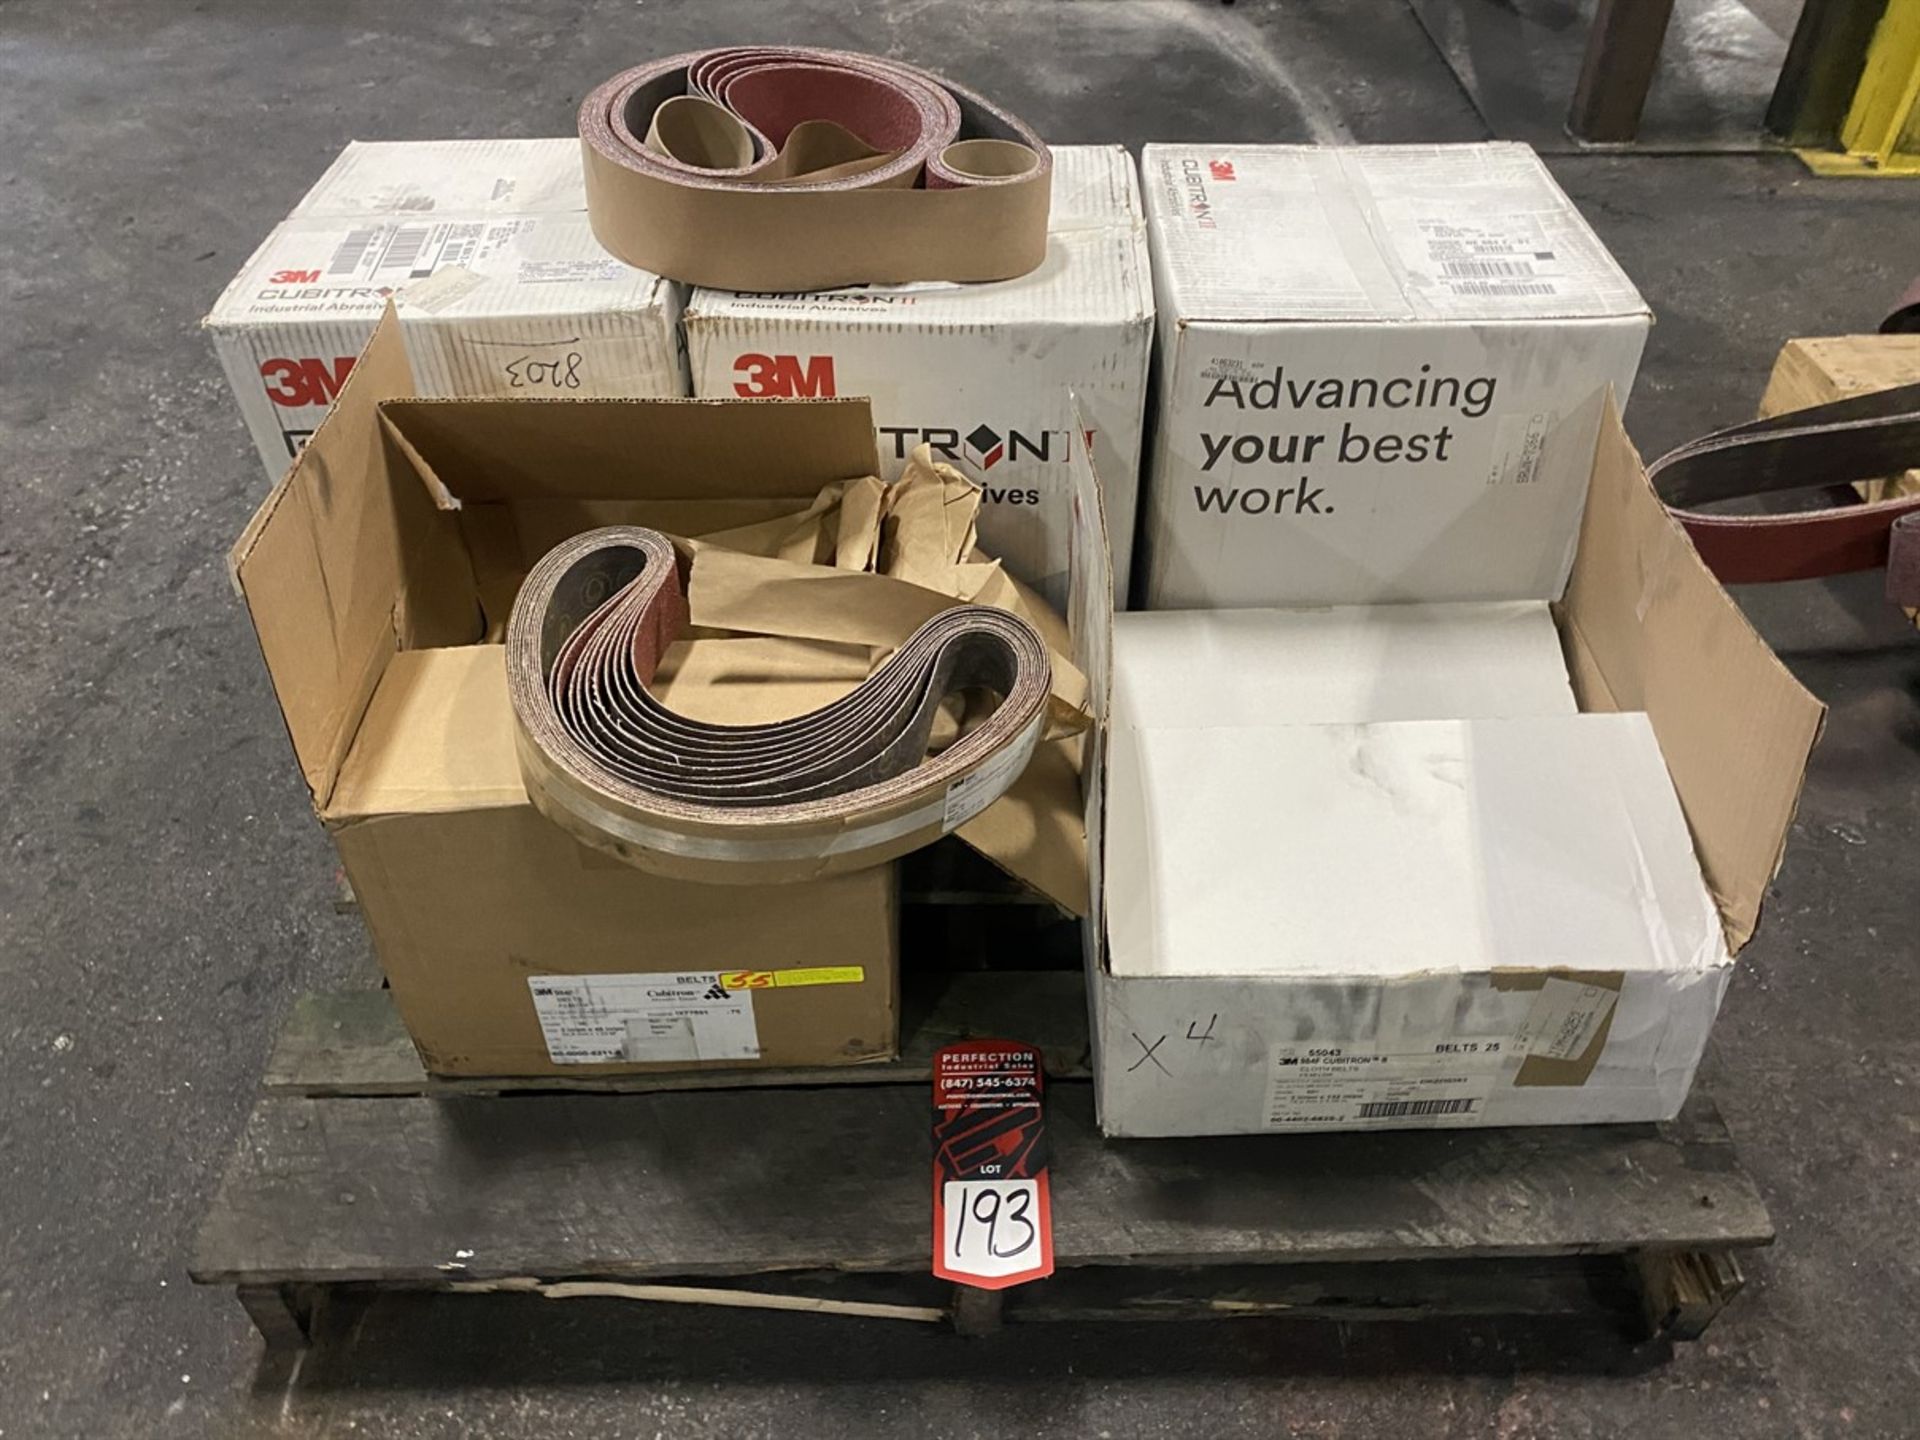 Lot of Assorted 3M 3" and 2" Abrasive Belts (New in Box)